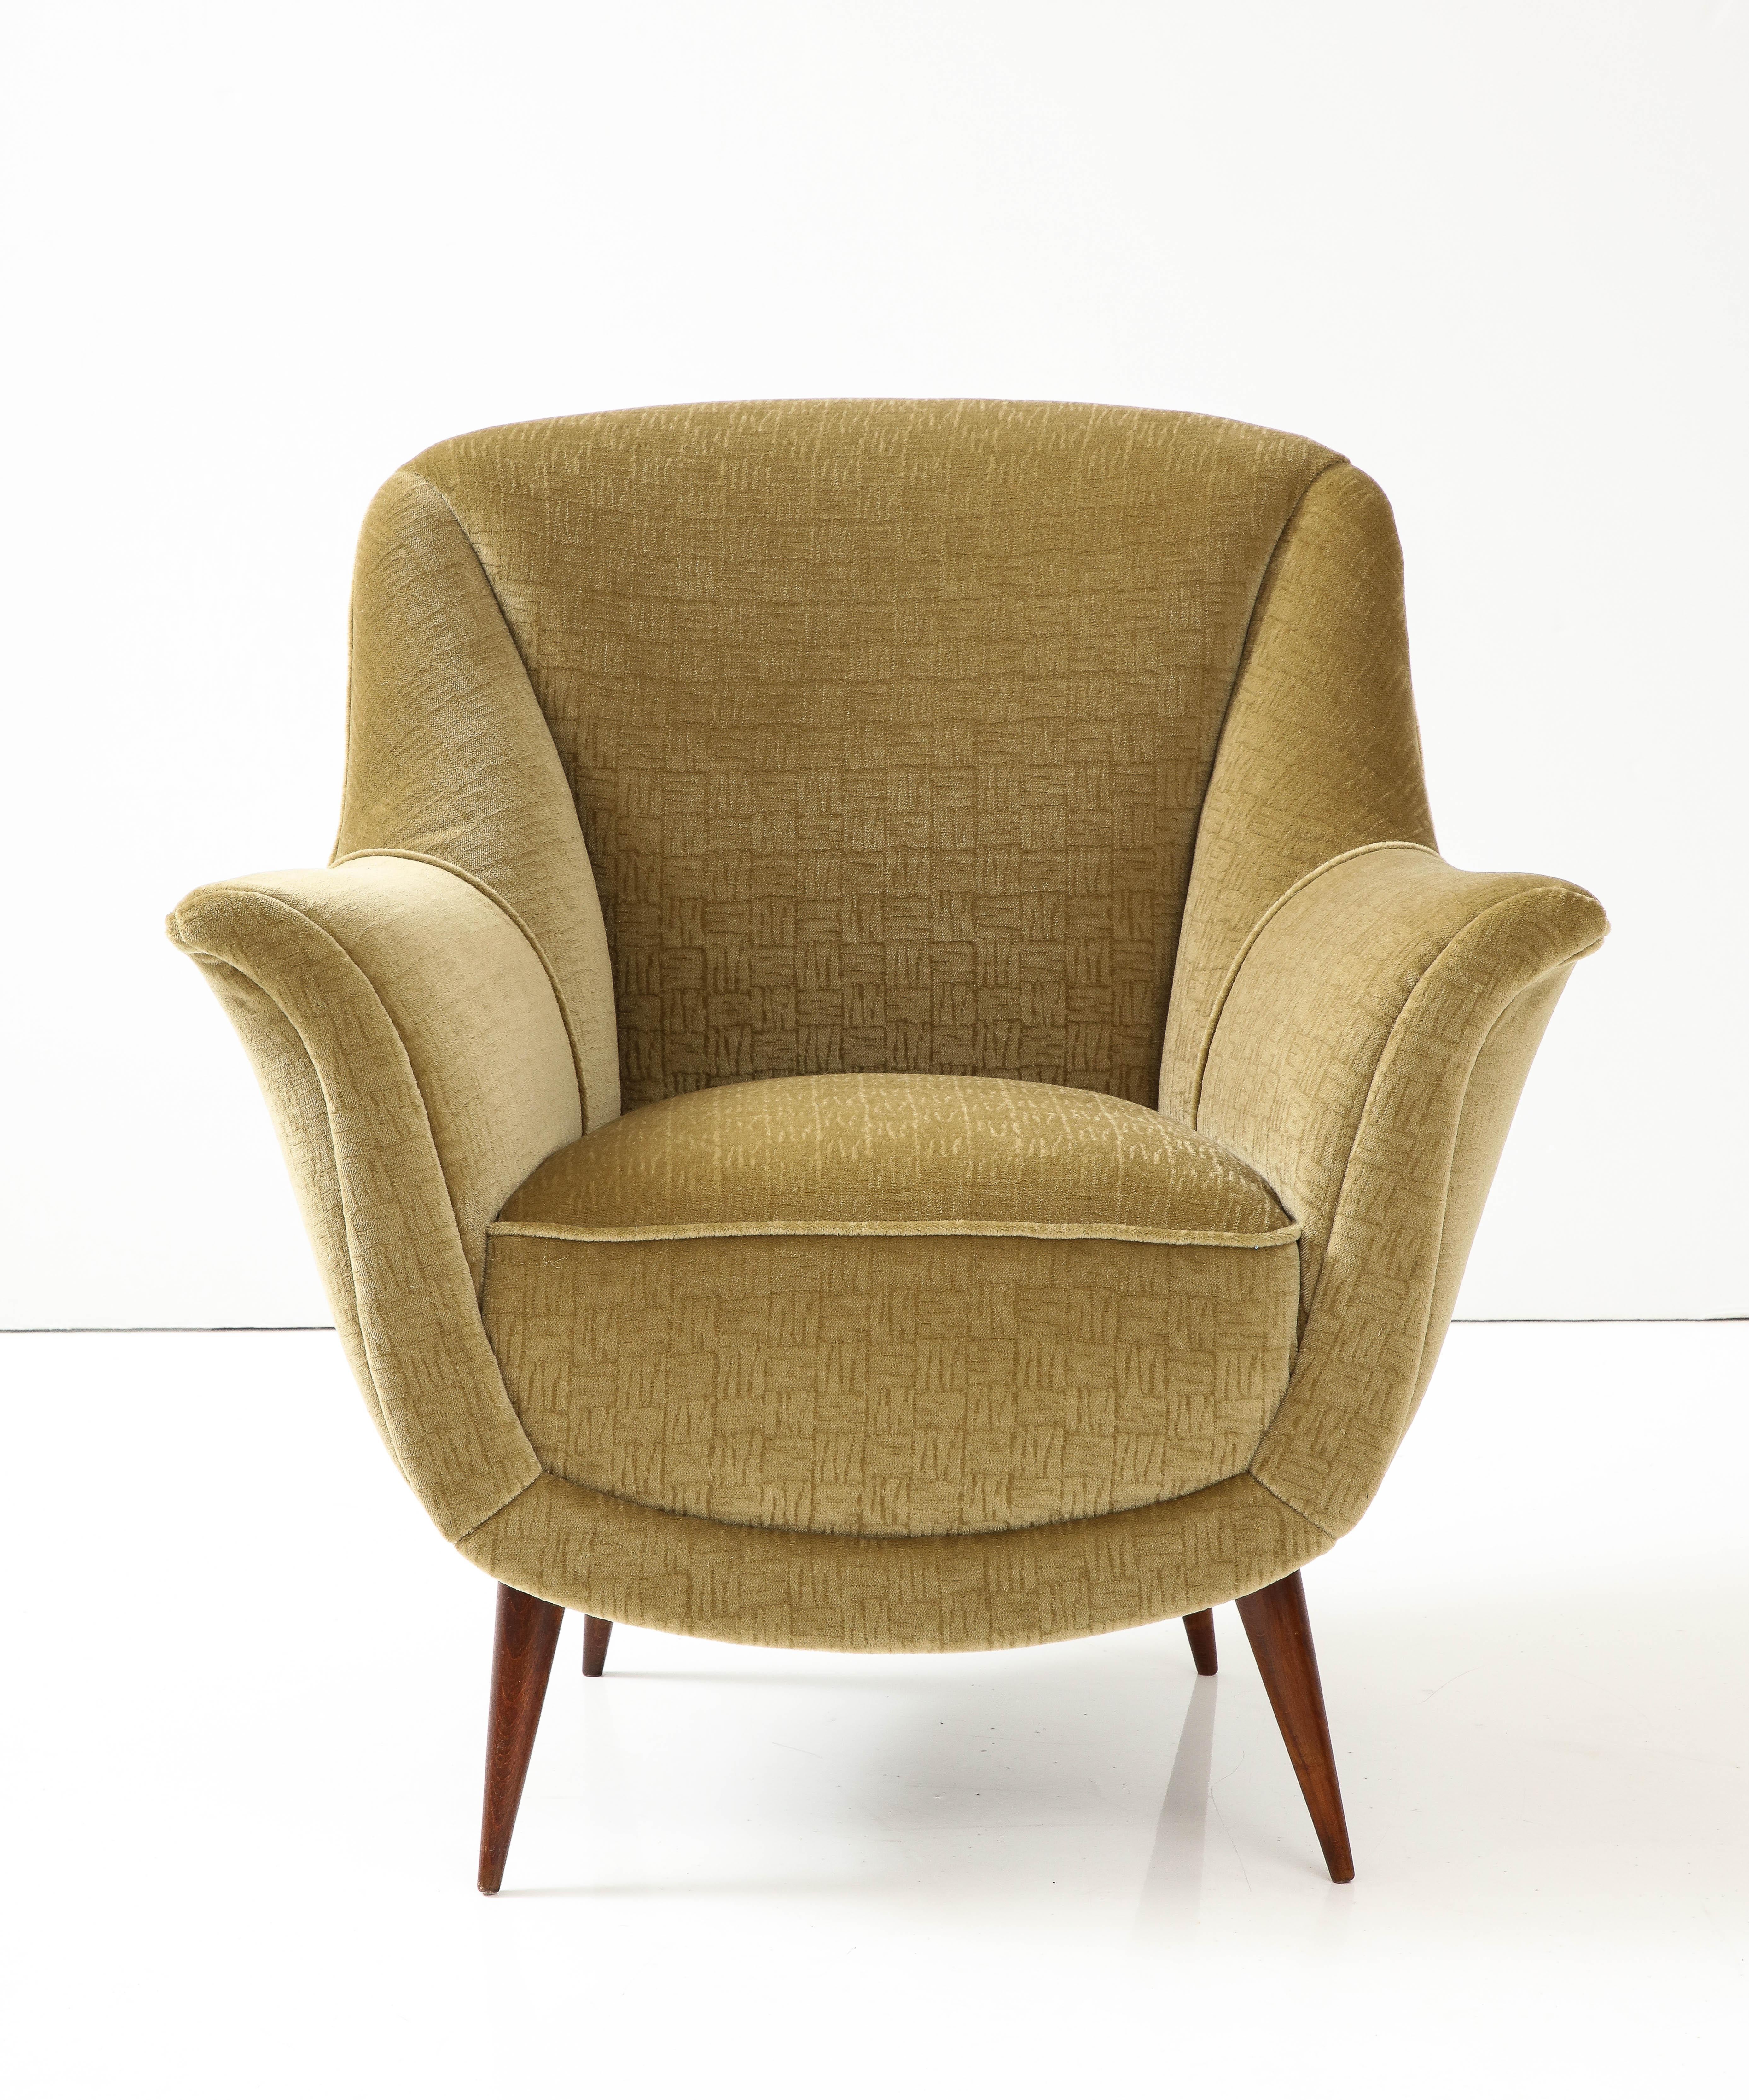 1950's Modernist Gio Ponti Style Italian Lounge Chairs In Mohair Upholstery In Good Condition For Sale In New York, NY